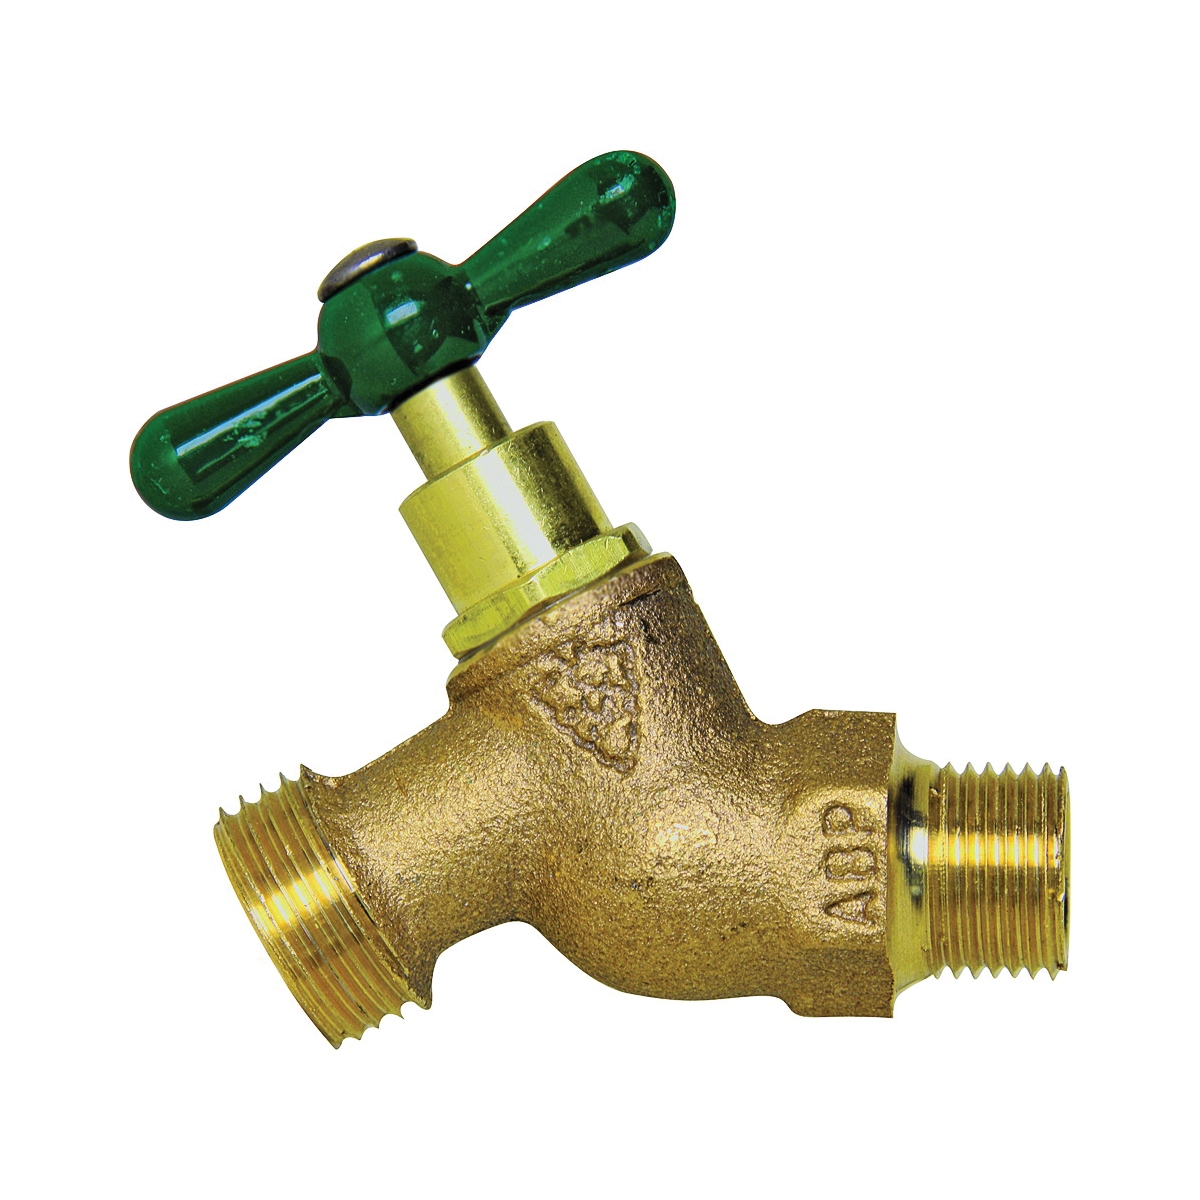 351BCLD Hose Bibb, 3/4 x 3/4 in Connection, MIP x Hose, 8 to 9 gpm, 125 psi Pressure, Brass Body, Rough